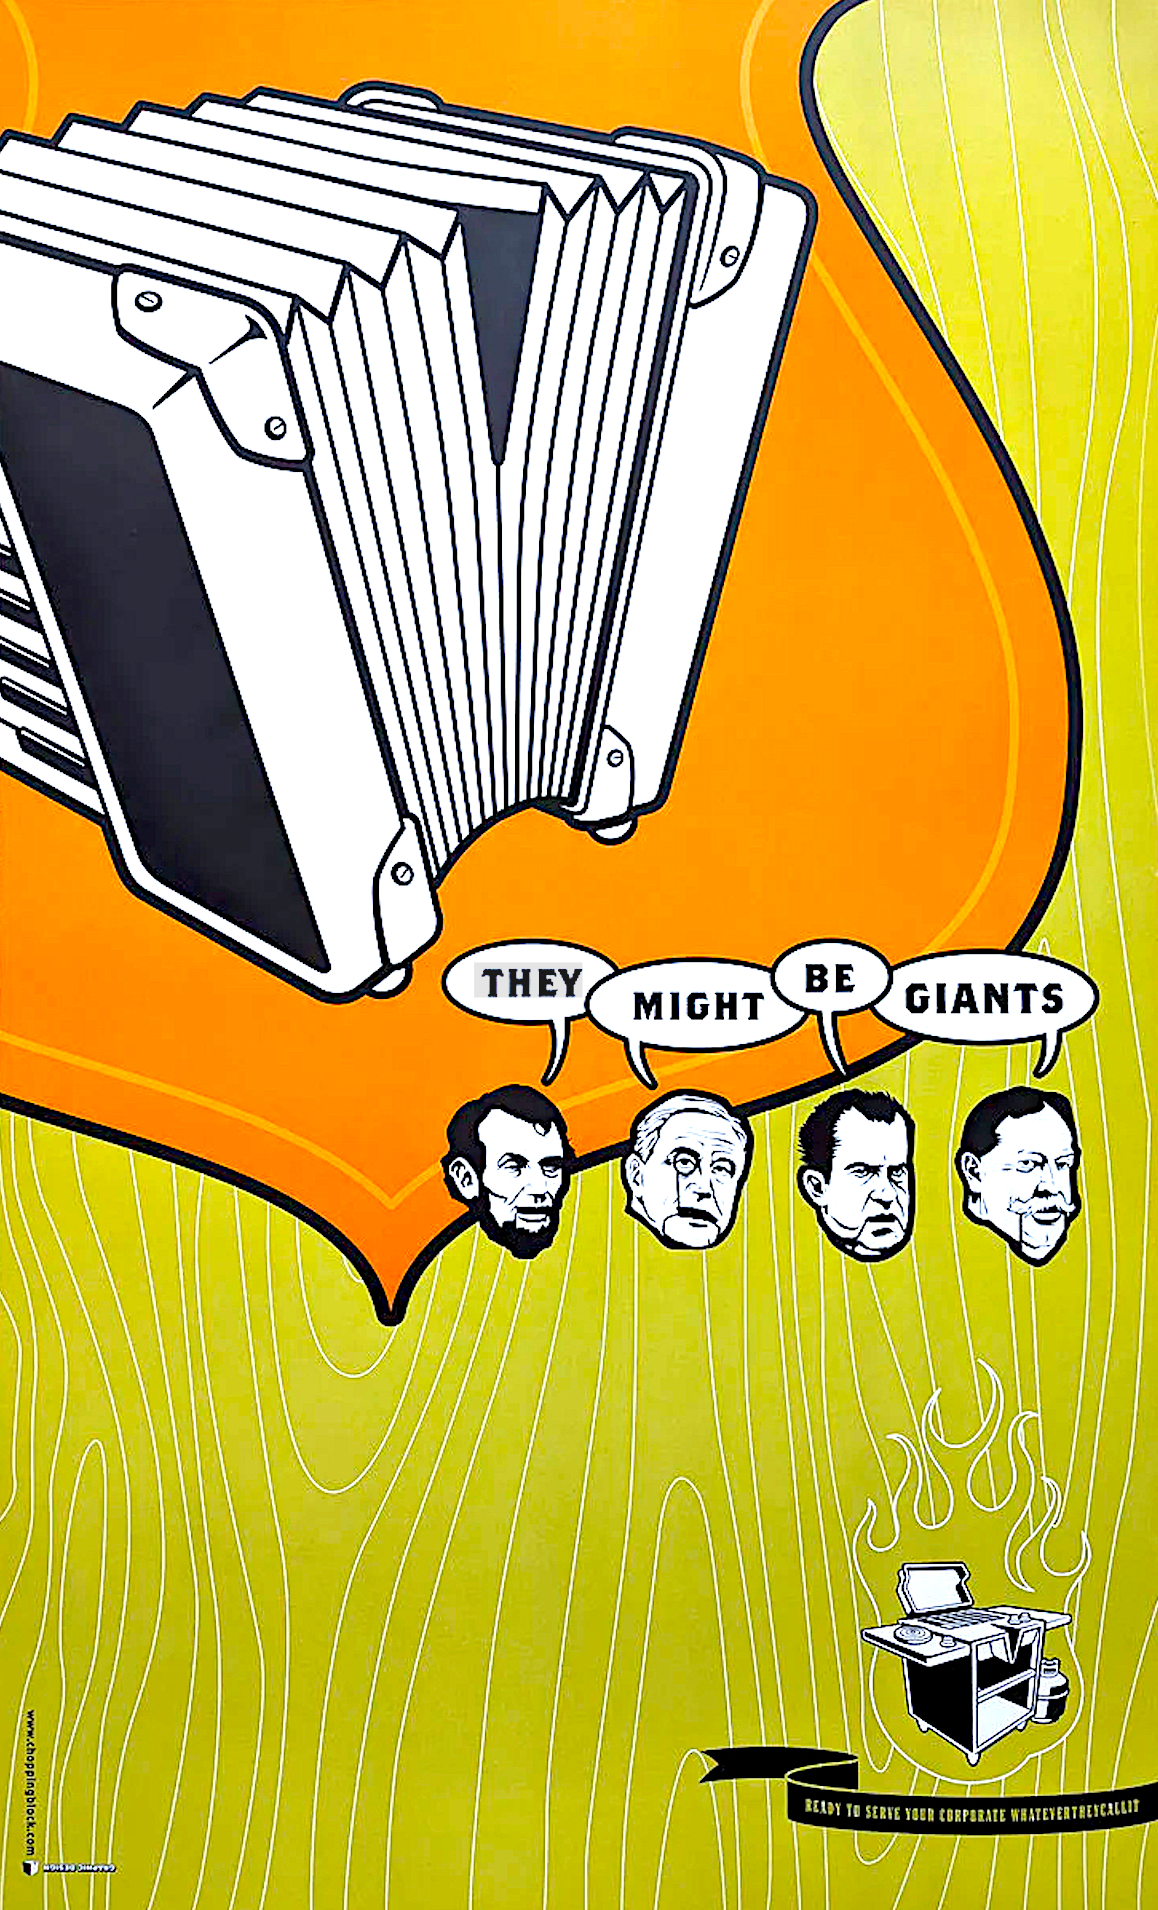 TMBG Party Poster – They Might Be Giants